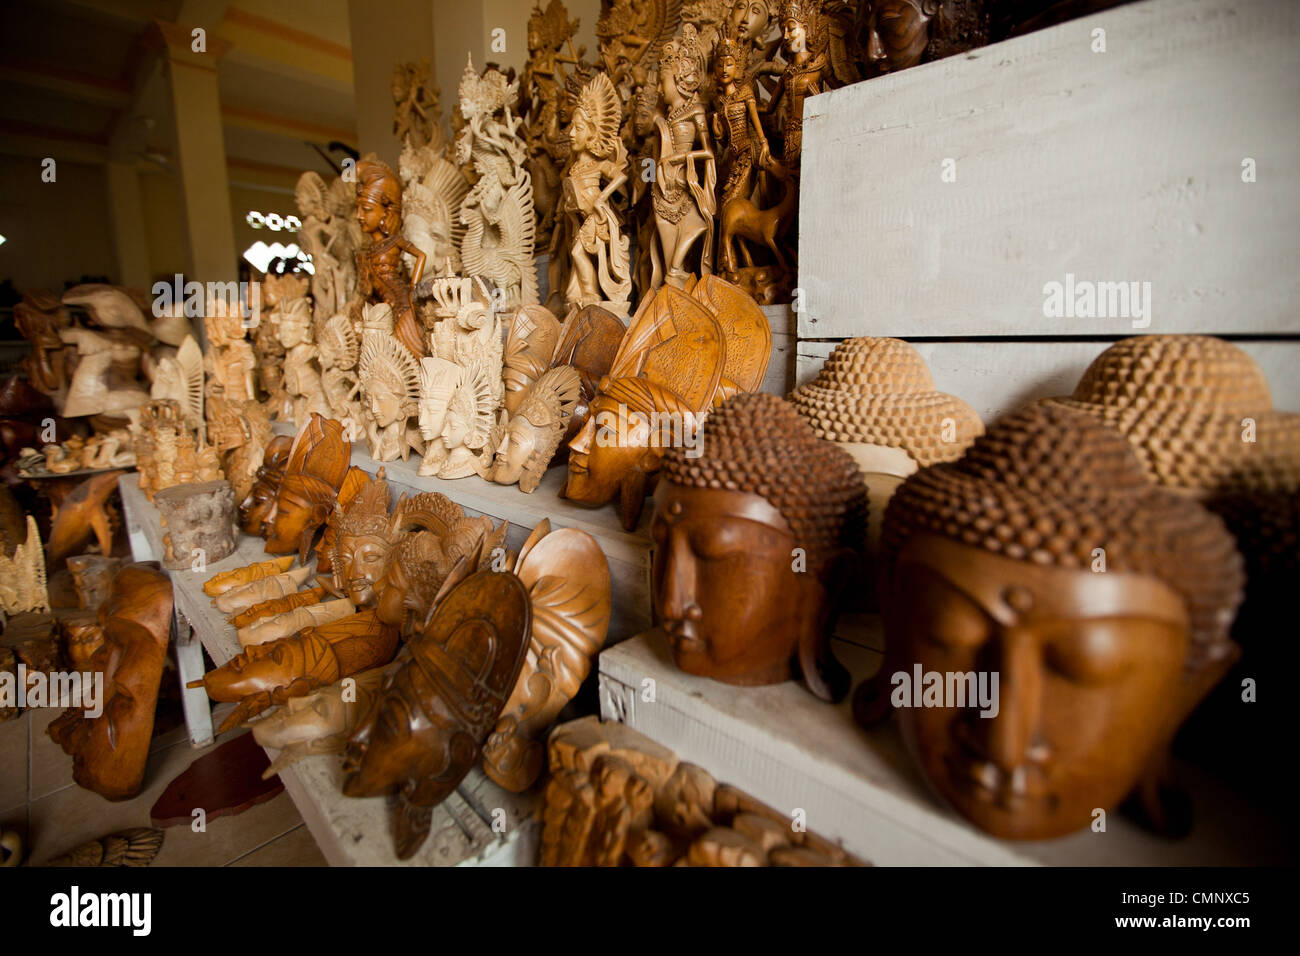 Whittling wood craft carving work Stock Photo - Alamy